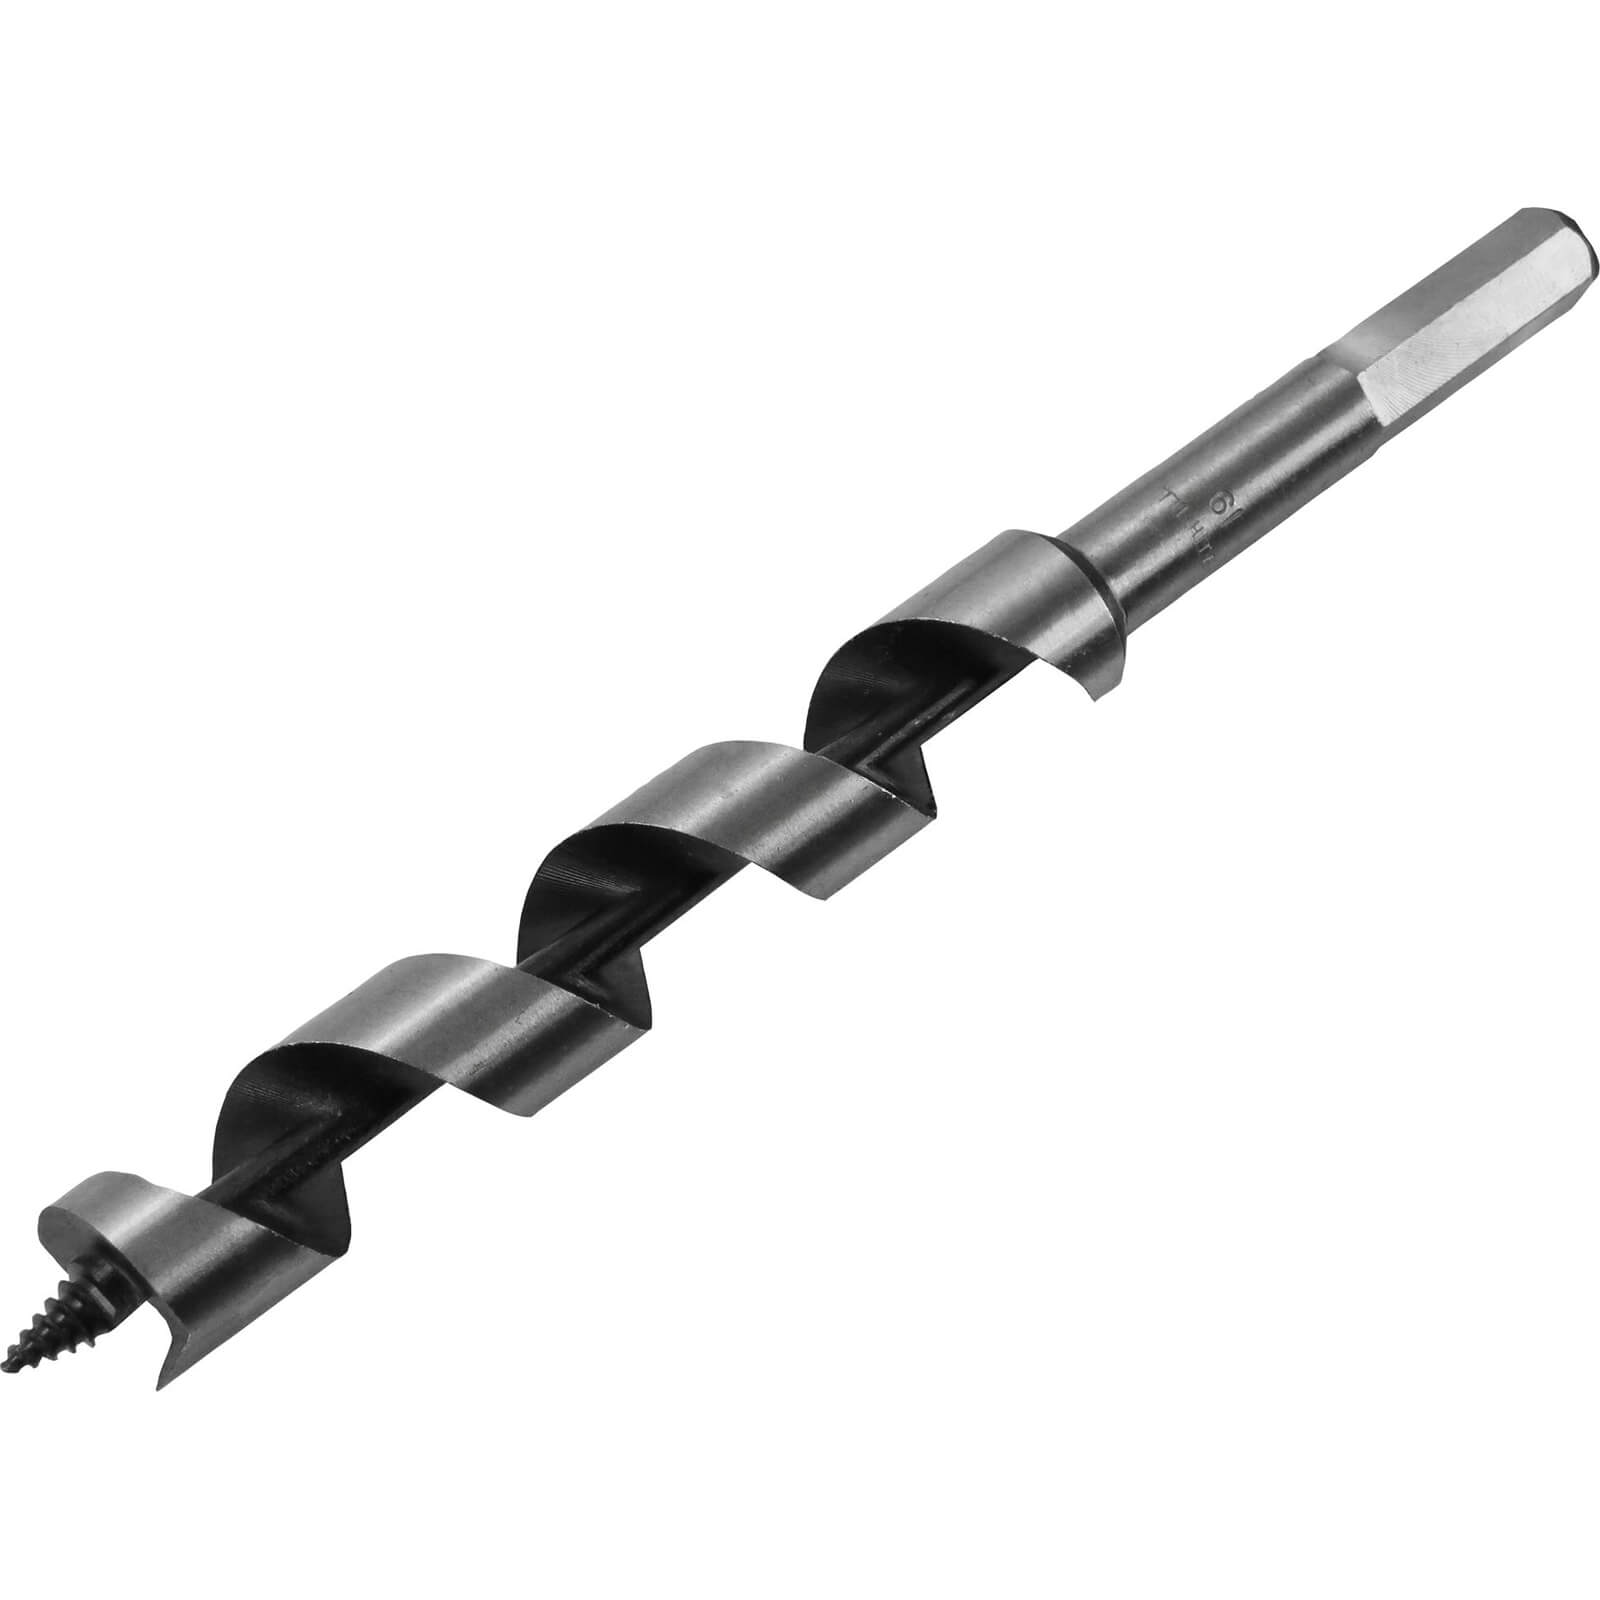 Image of Faithfull Combination Auger Drill Bit 19mm 200mm